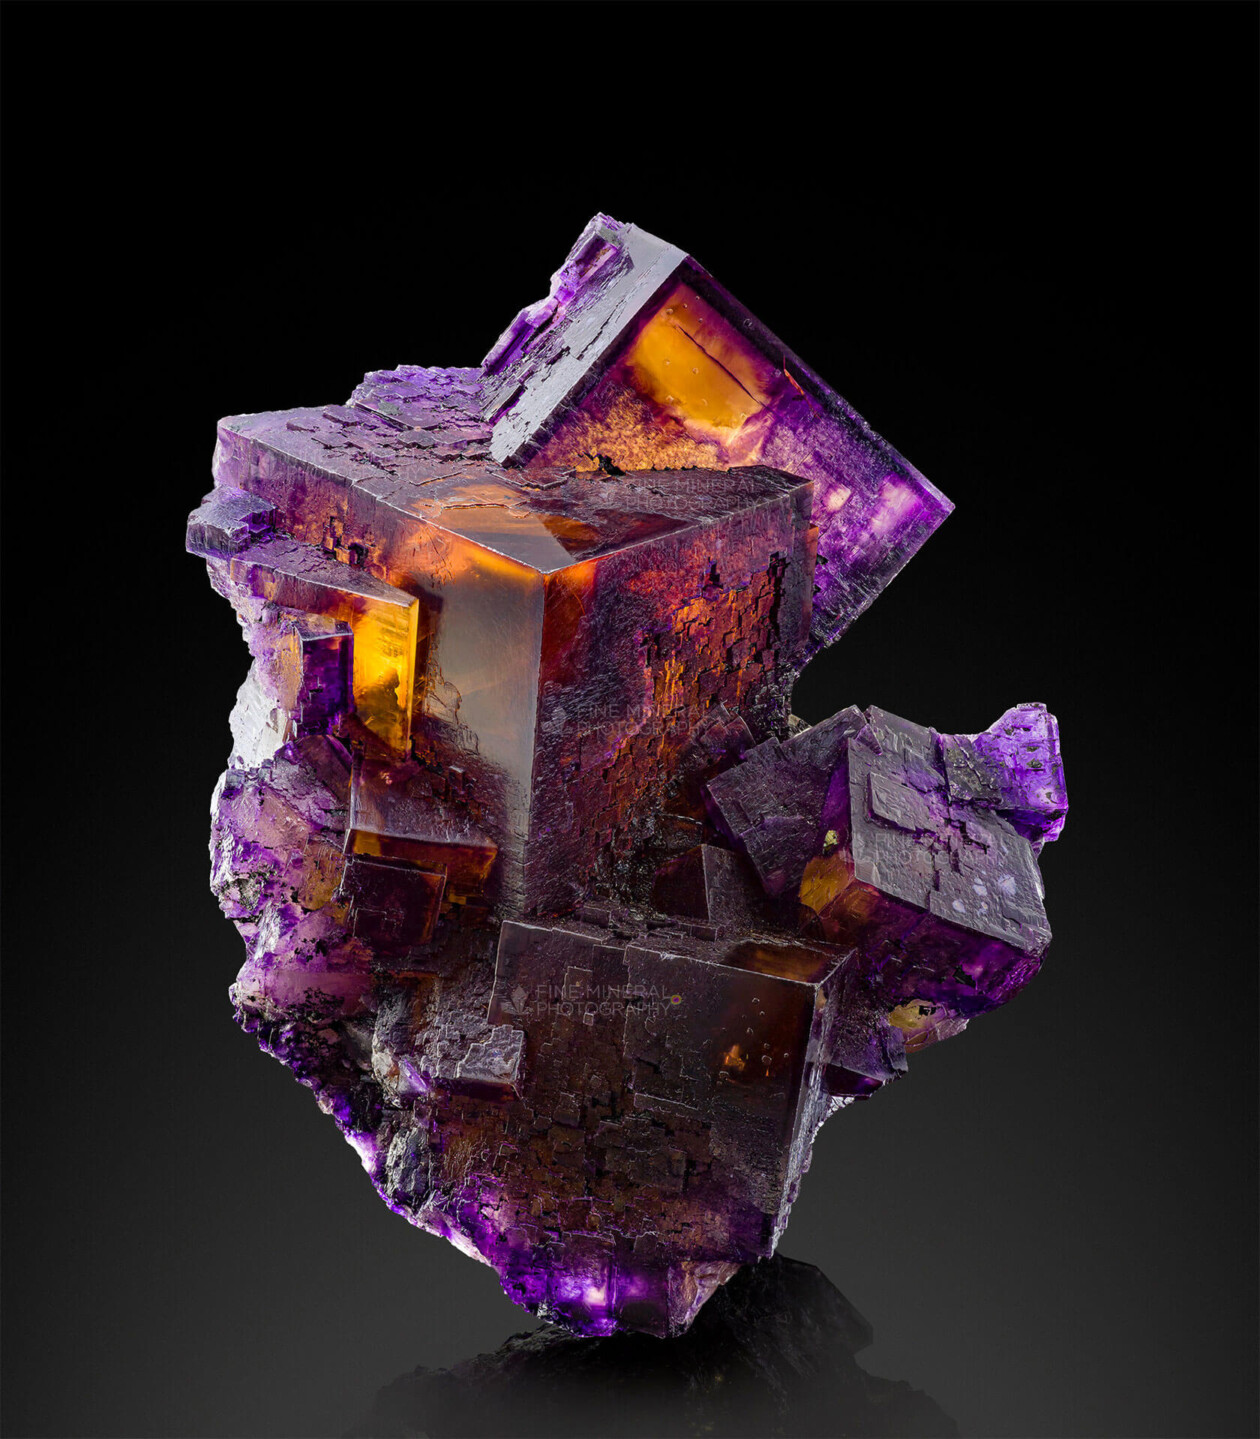 The Magnificent Mineral Photography Of Laszlo Kupi (16)